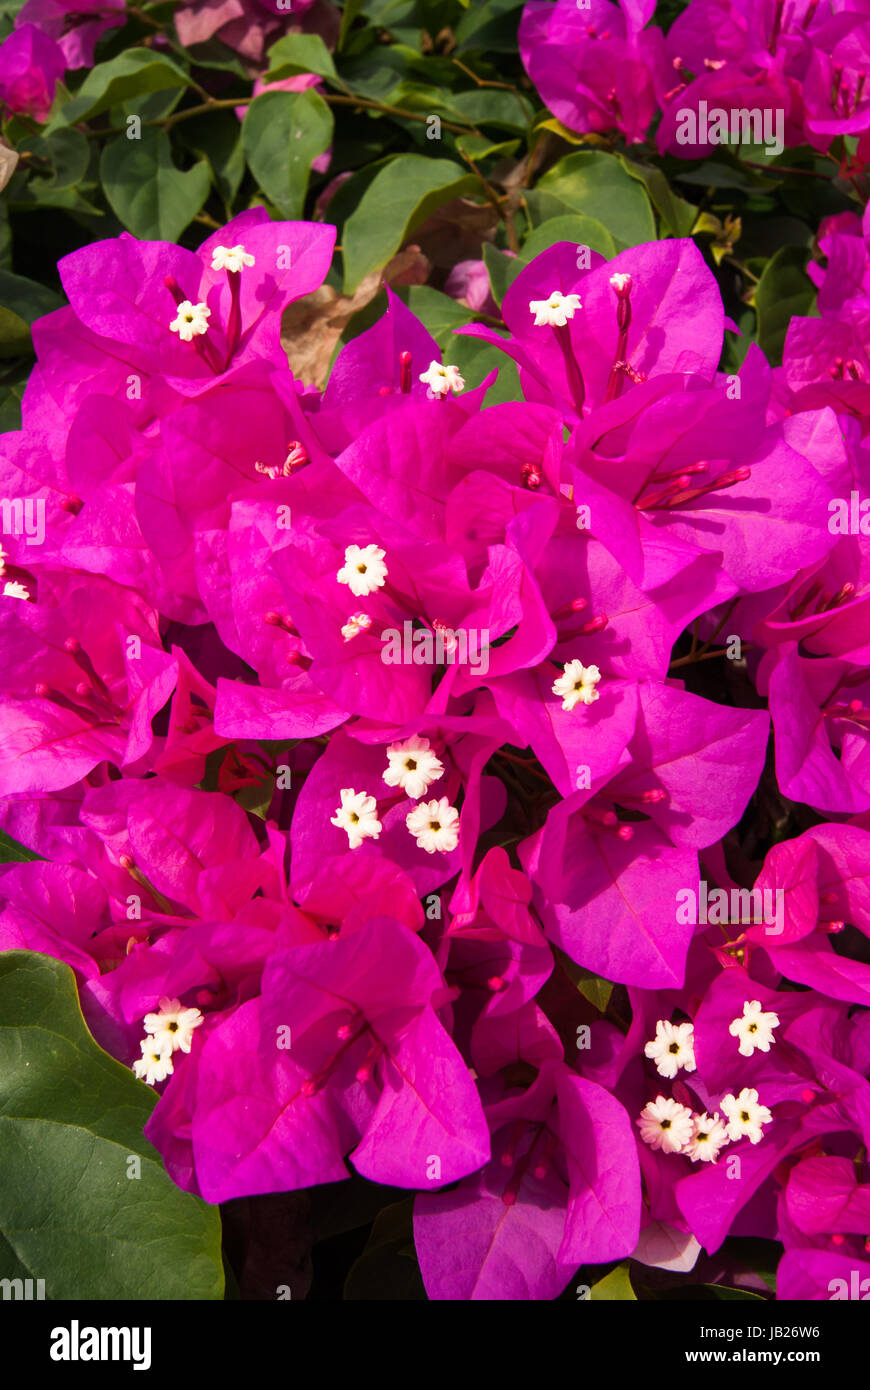 A dense cluster of pink bougainvillea. A closeup shot displaying the little white centers nicely. Stock Photo